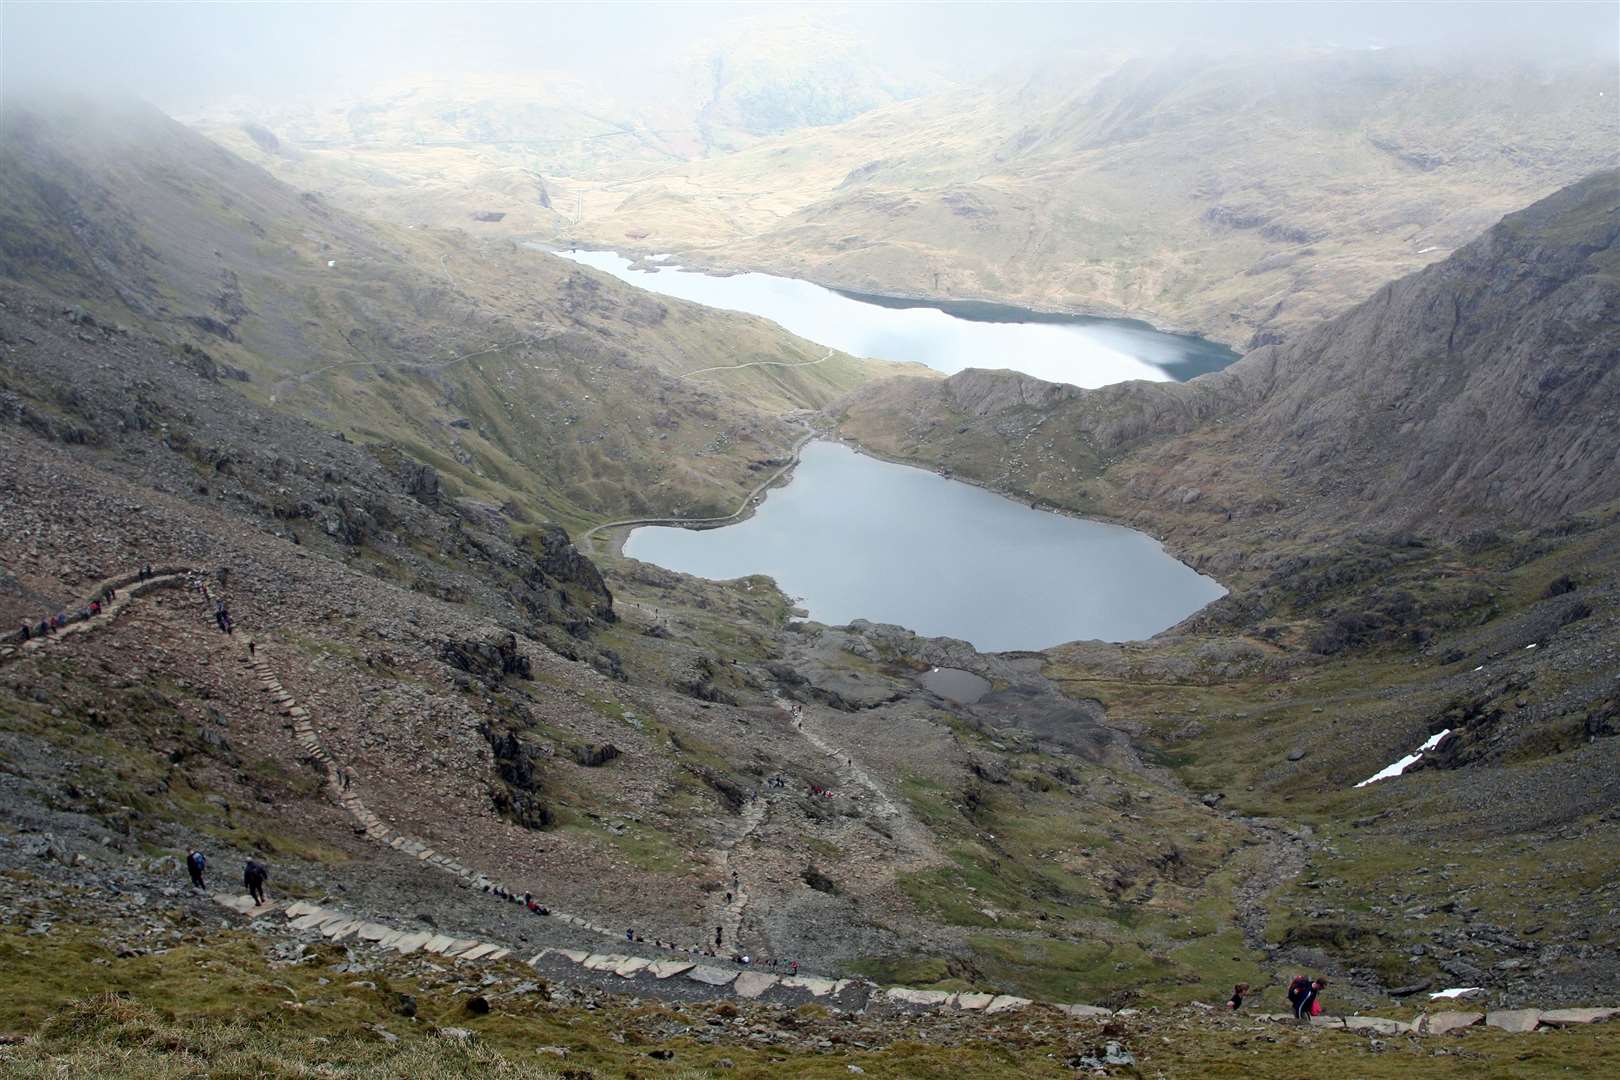 View from top of Mount Snowdon